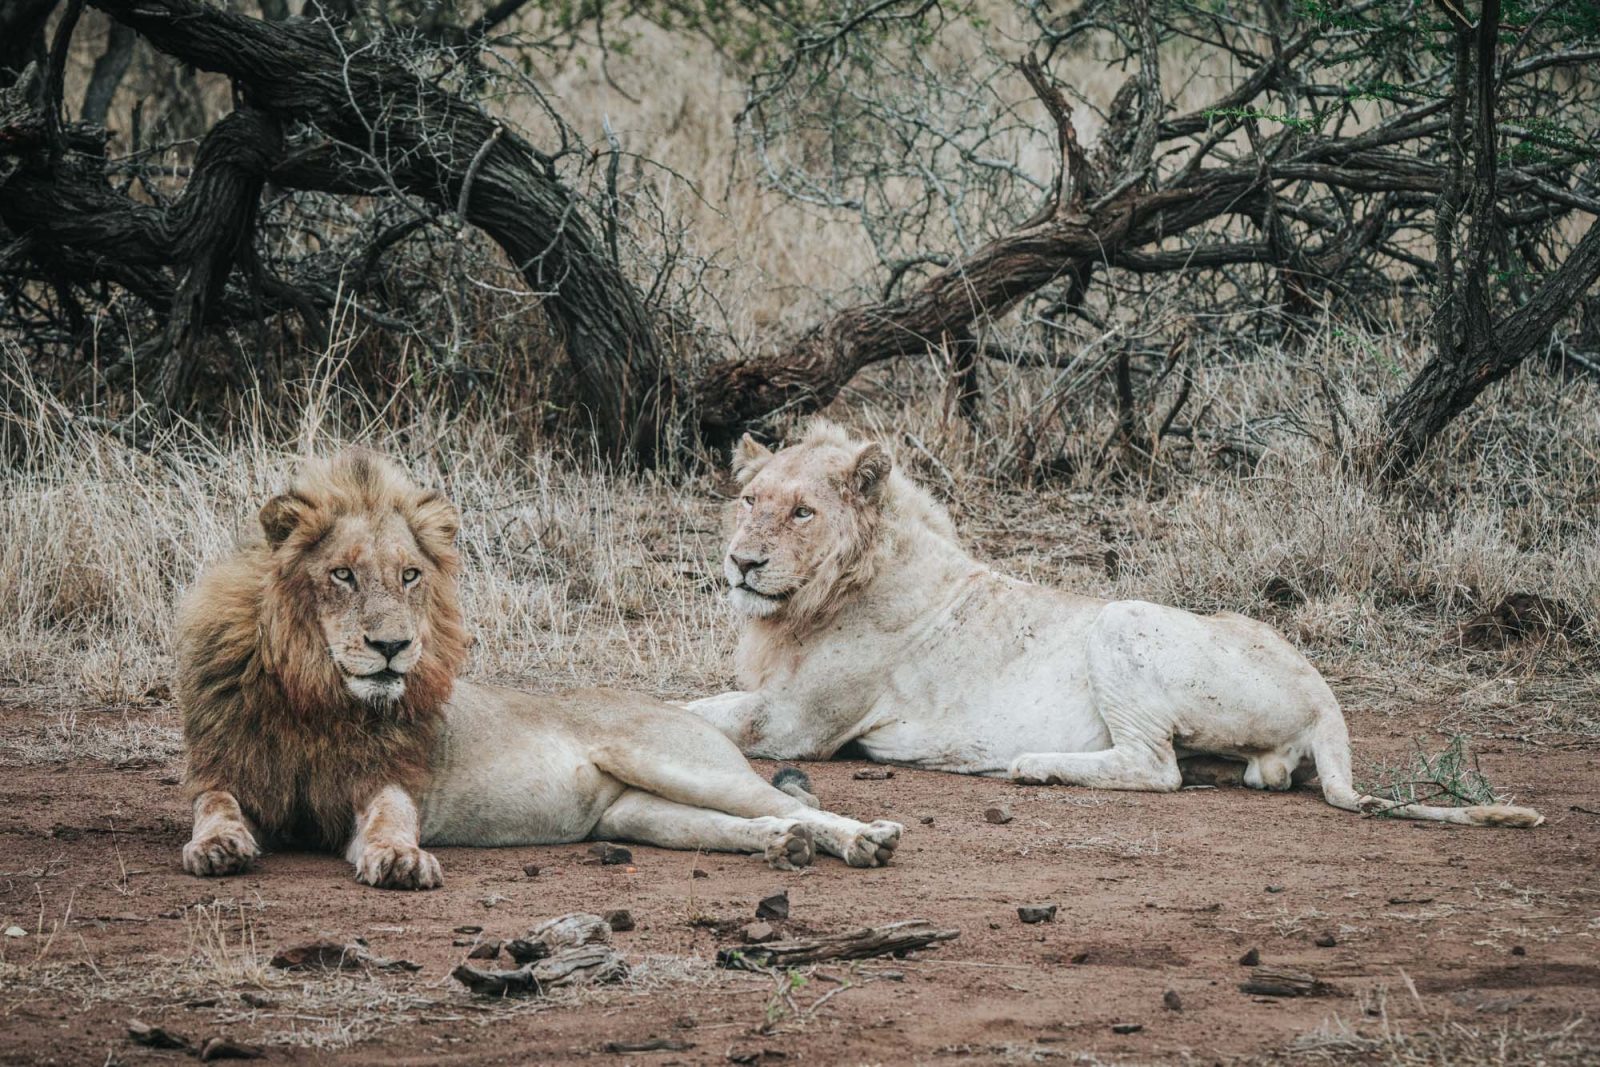 White lion spotted on a safari during our stay at Singita Sweti Lodge